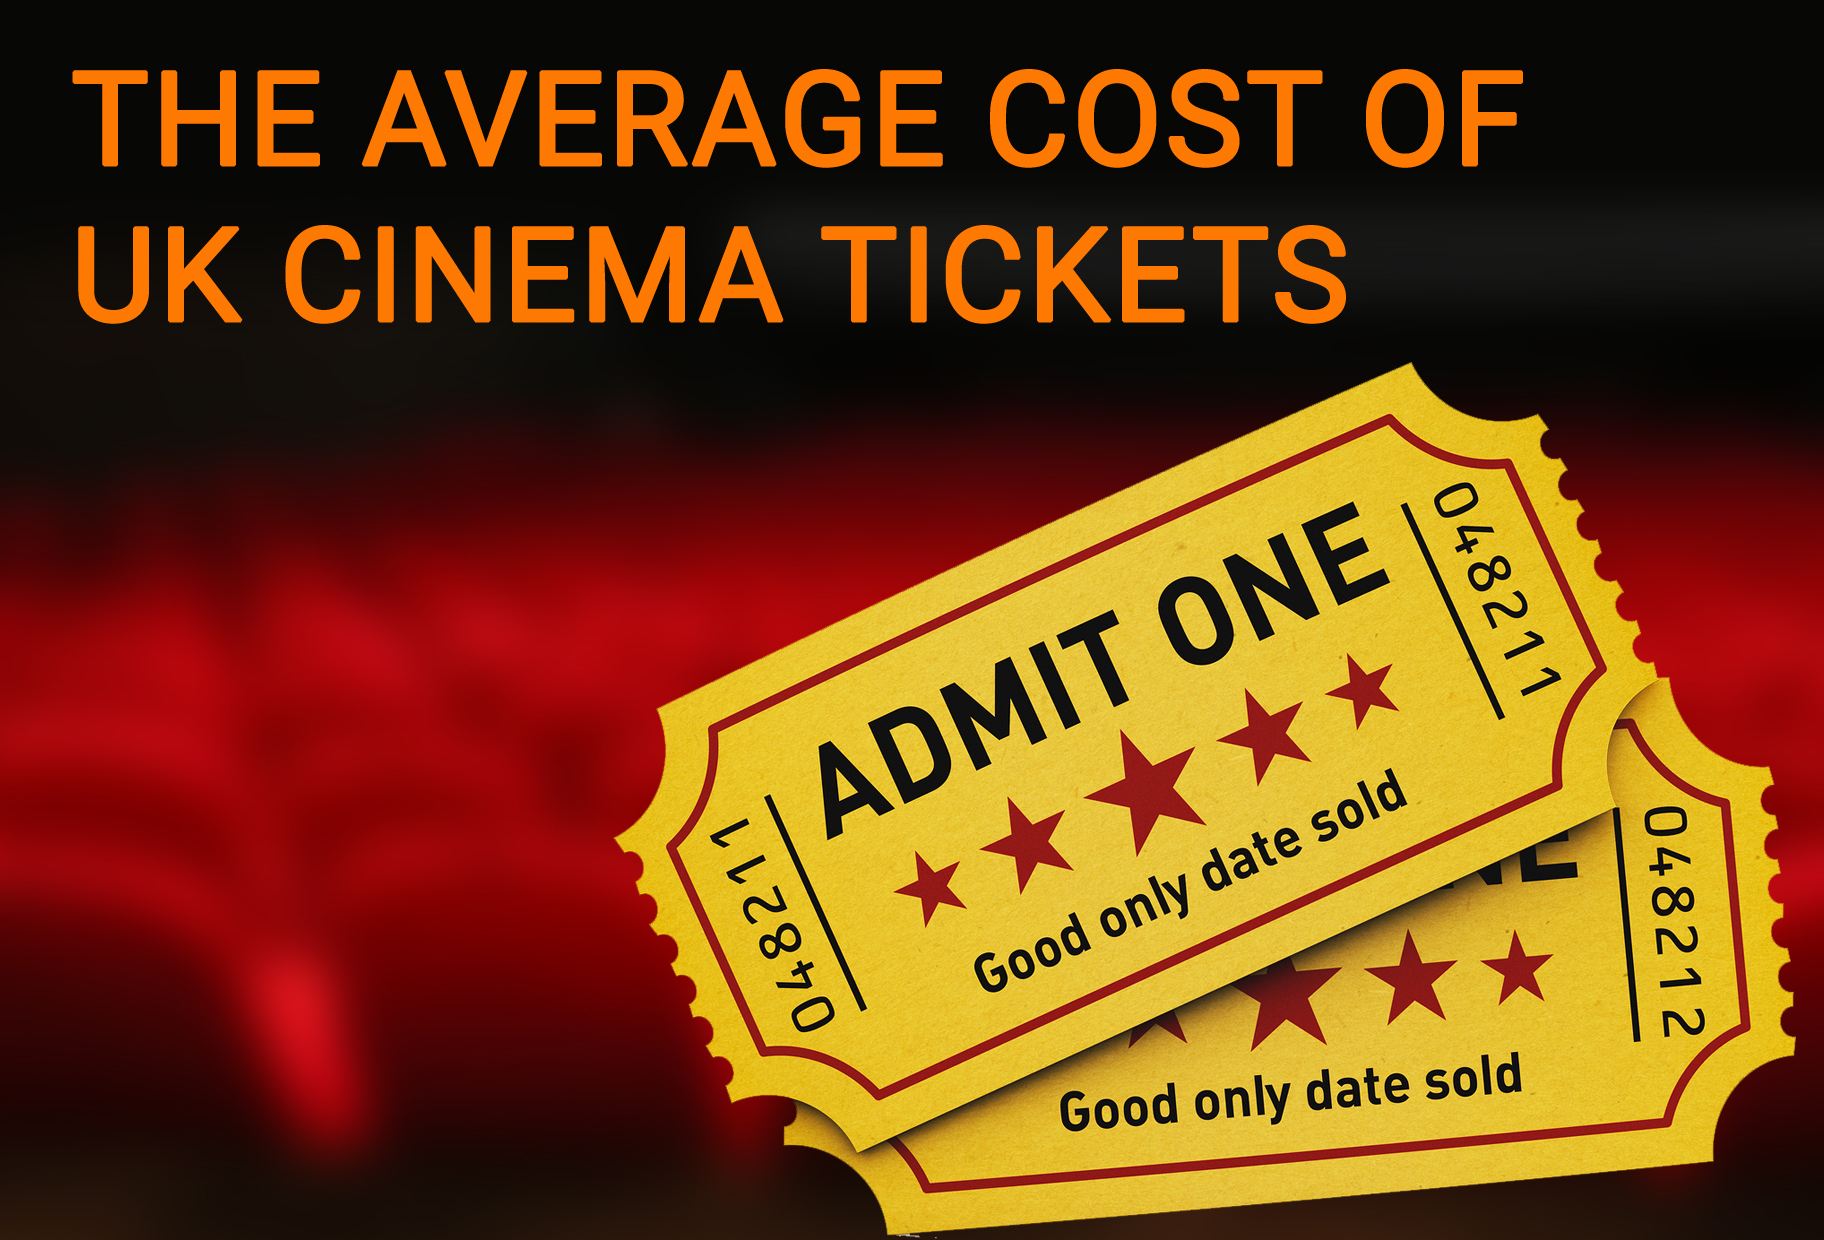 What's the average cost of a cinema ticket?